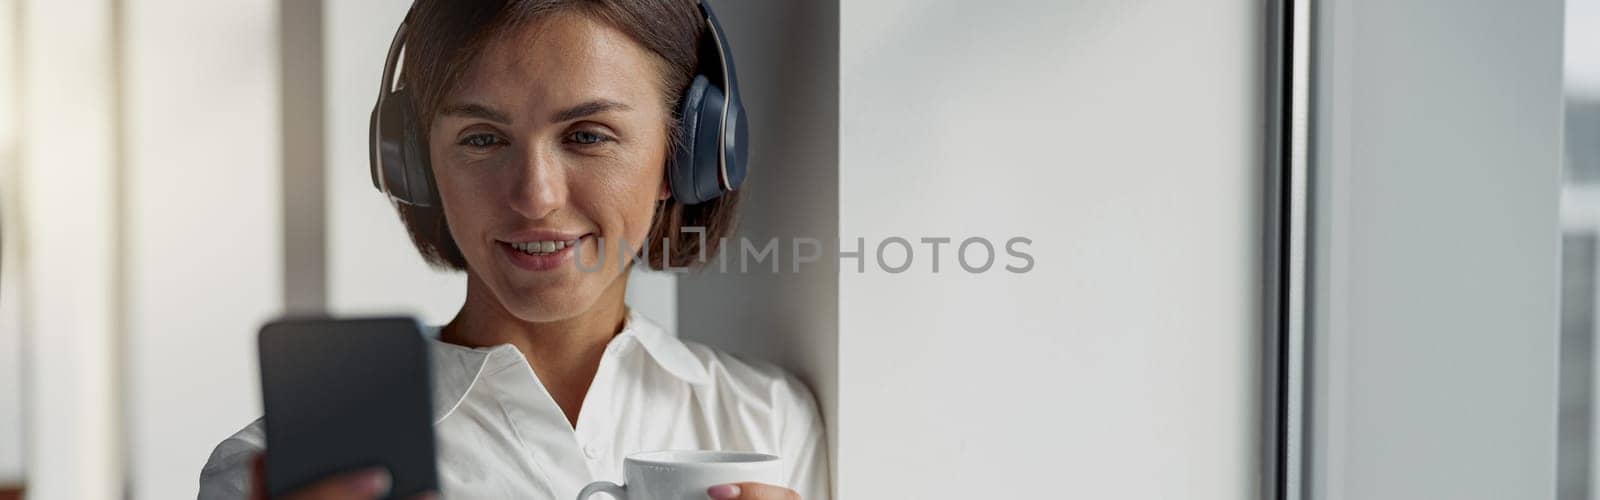 Smiling Business woman holding cup of coffee and using phone while standing near window at office by Yaroslav_astakhov